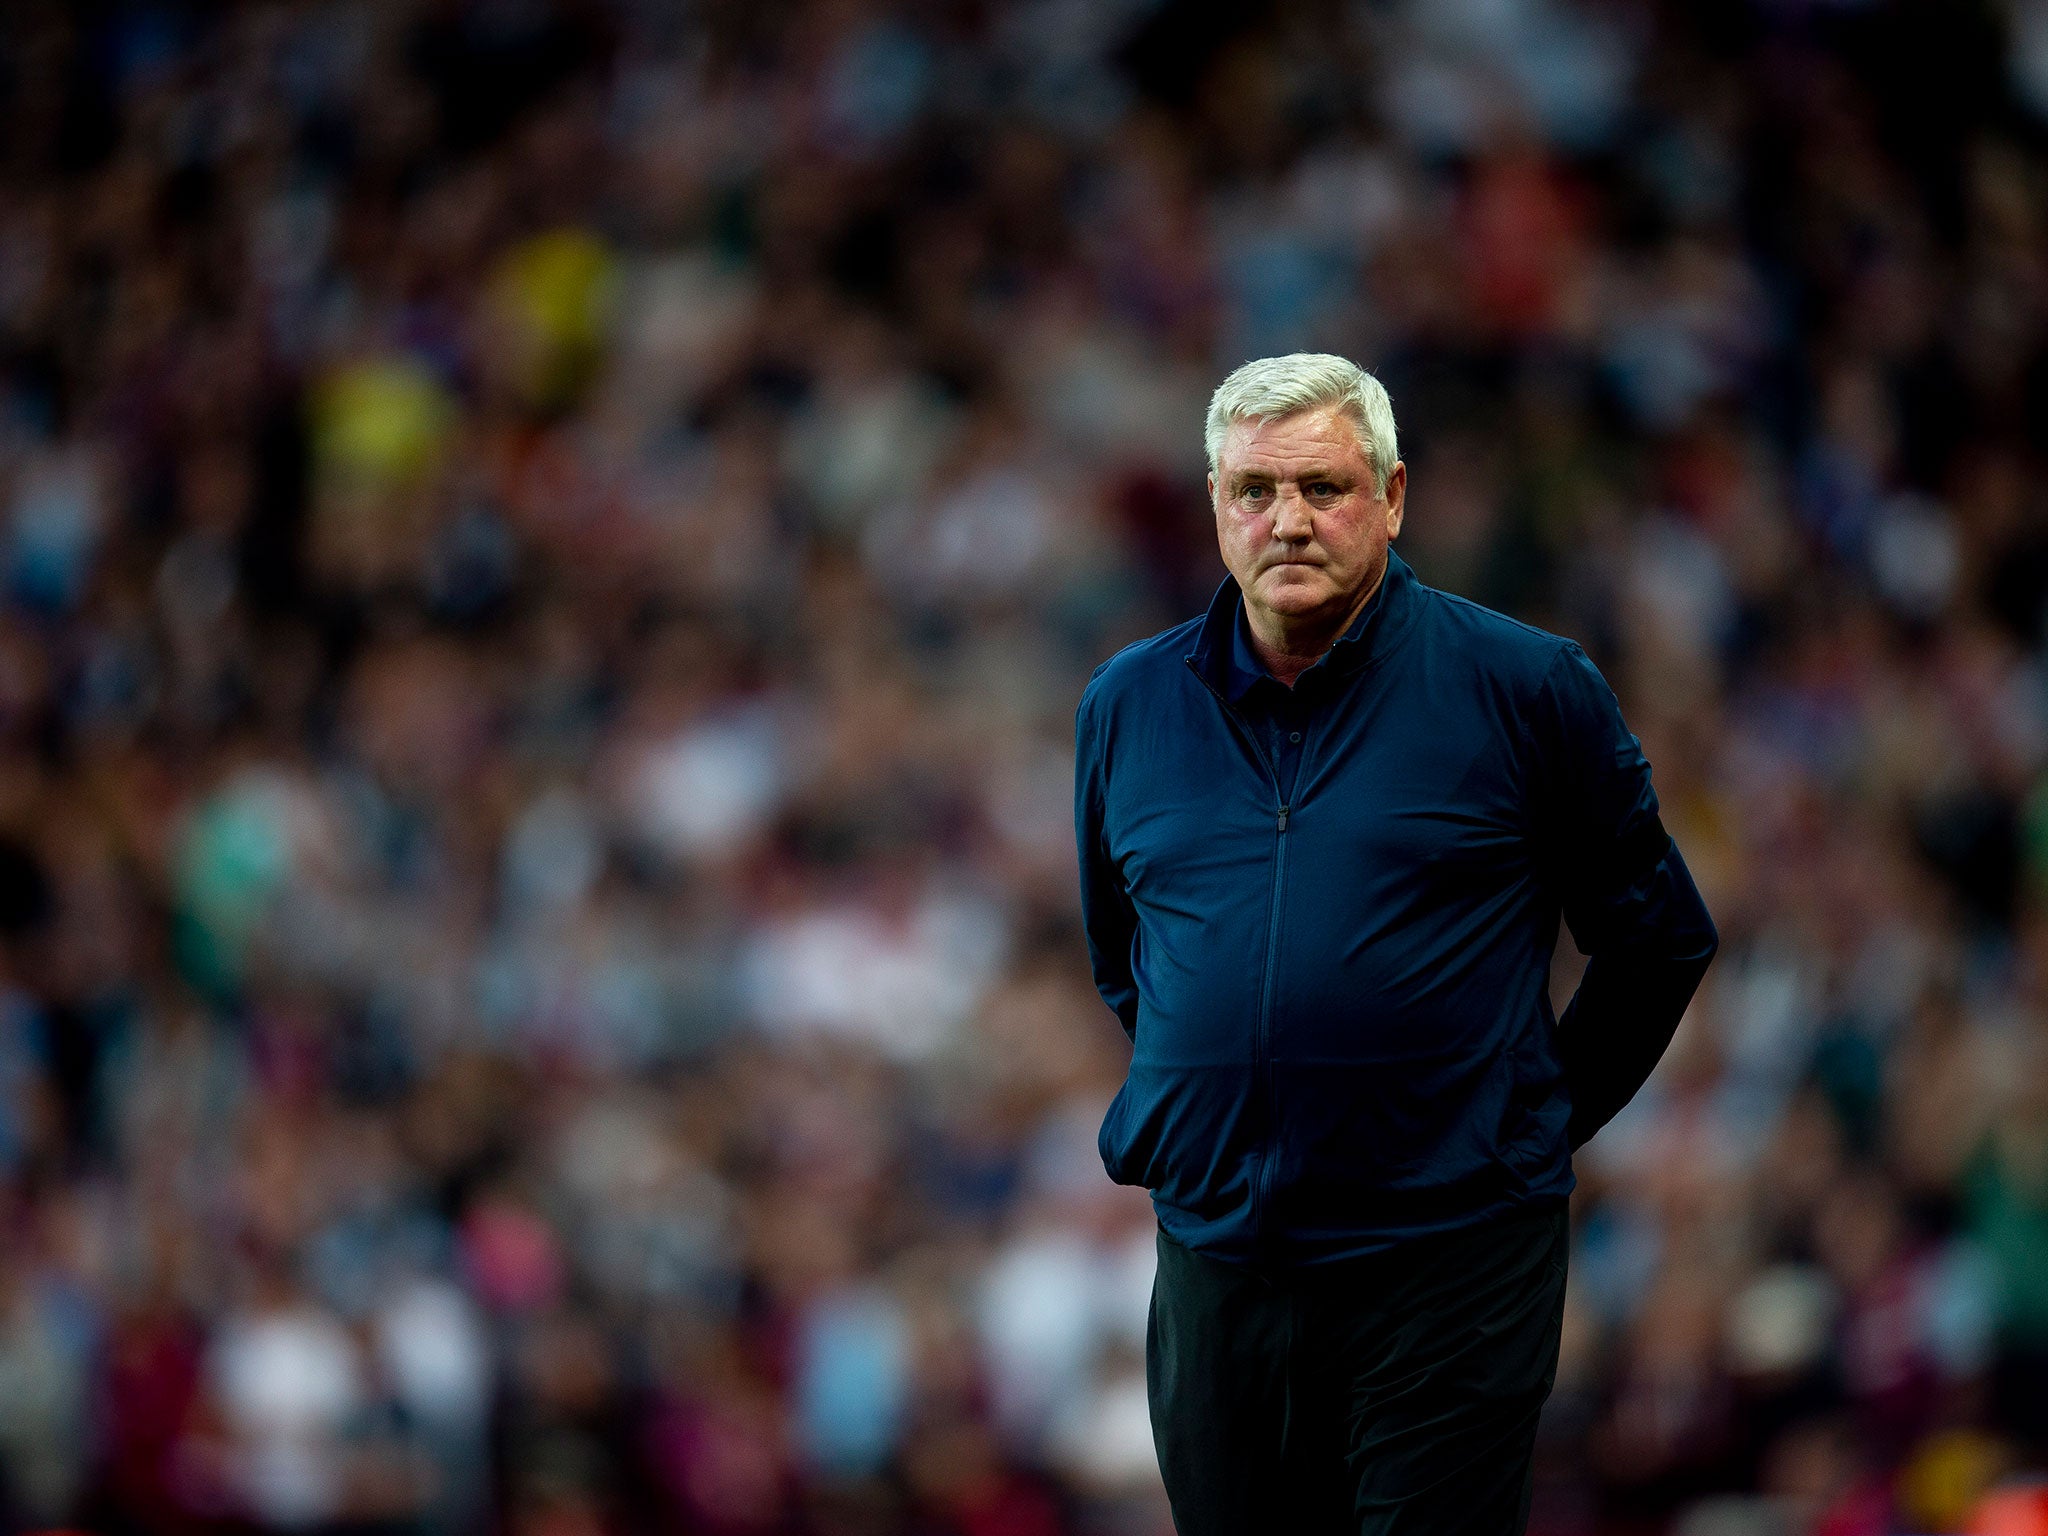 Steve Bruce has turned Aston Villa's fortunes around and brought them within touching distance of the Premier League